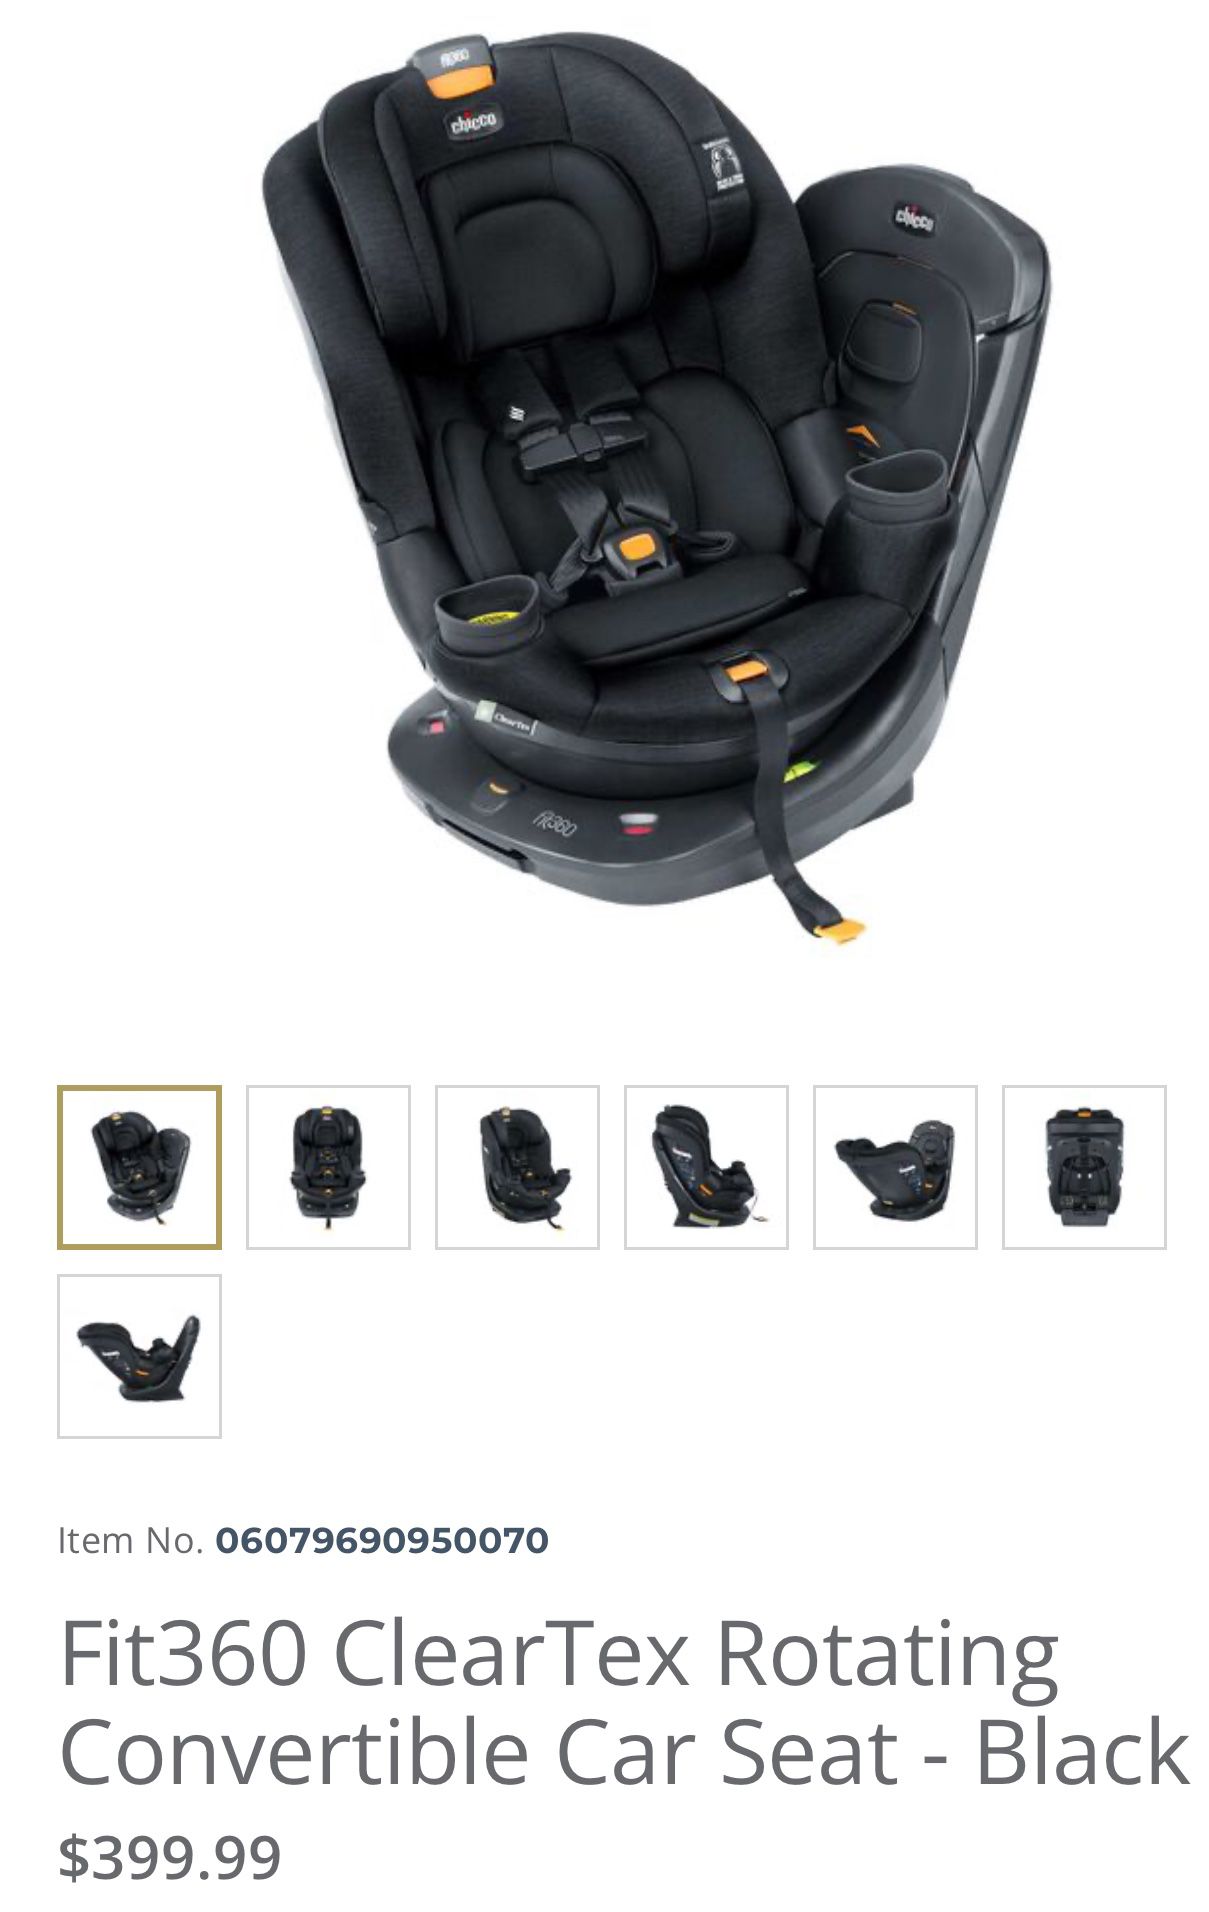 BRAND NEW Chicco Fit360 rotating car seat